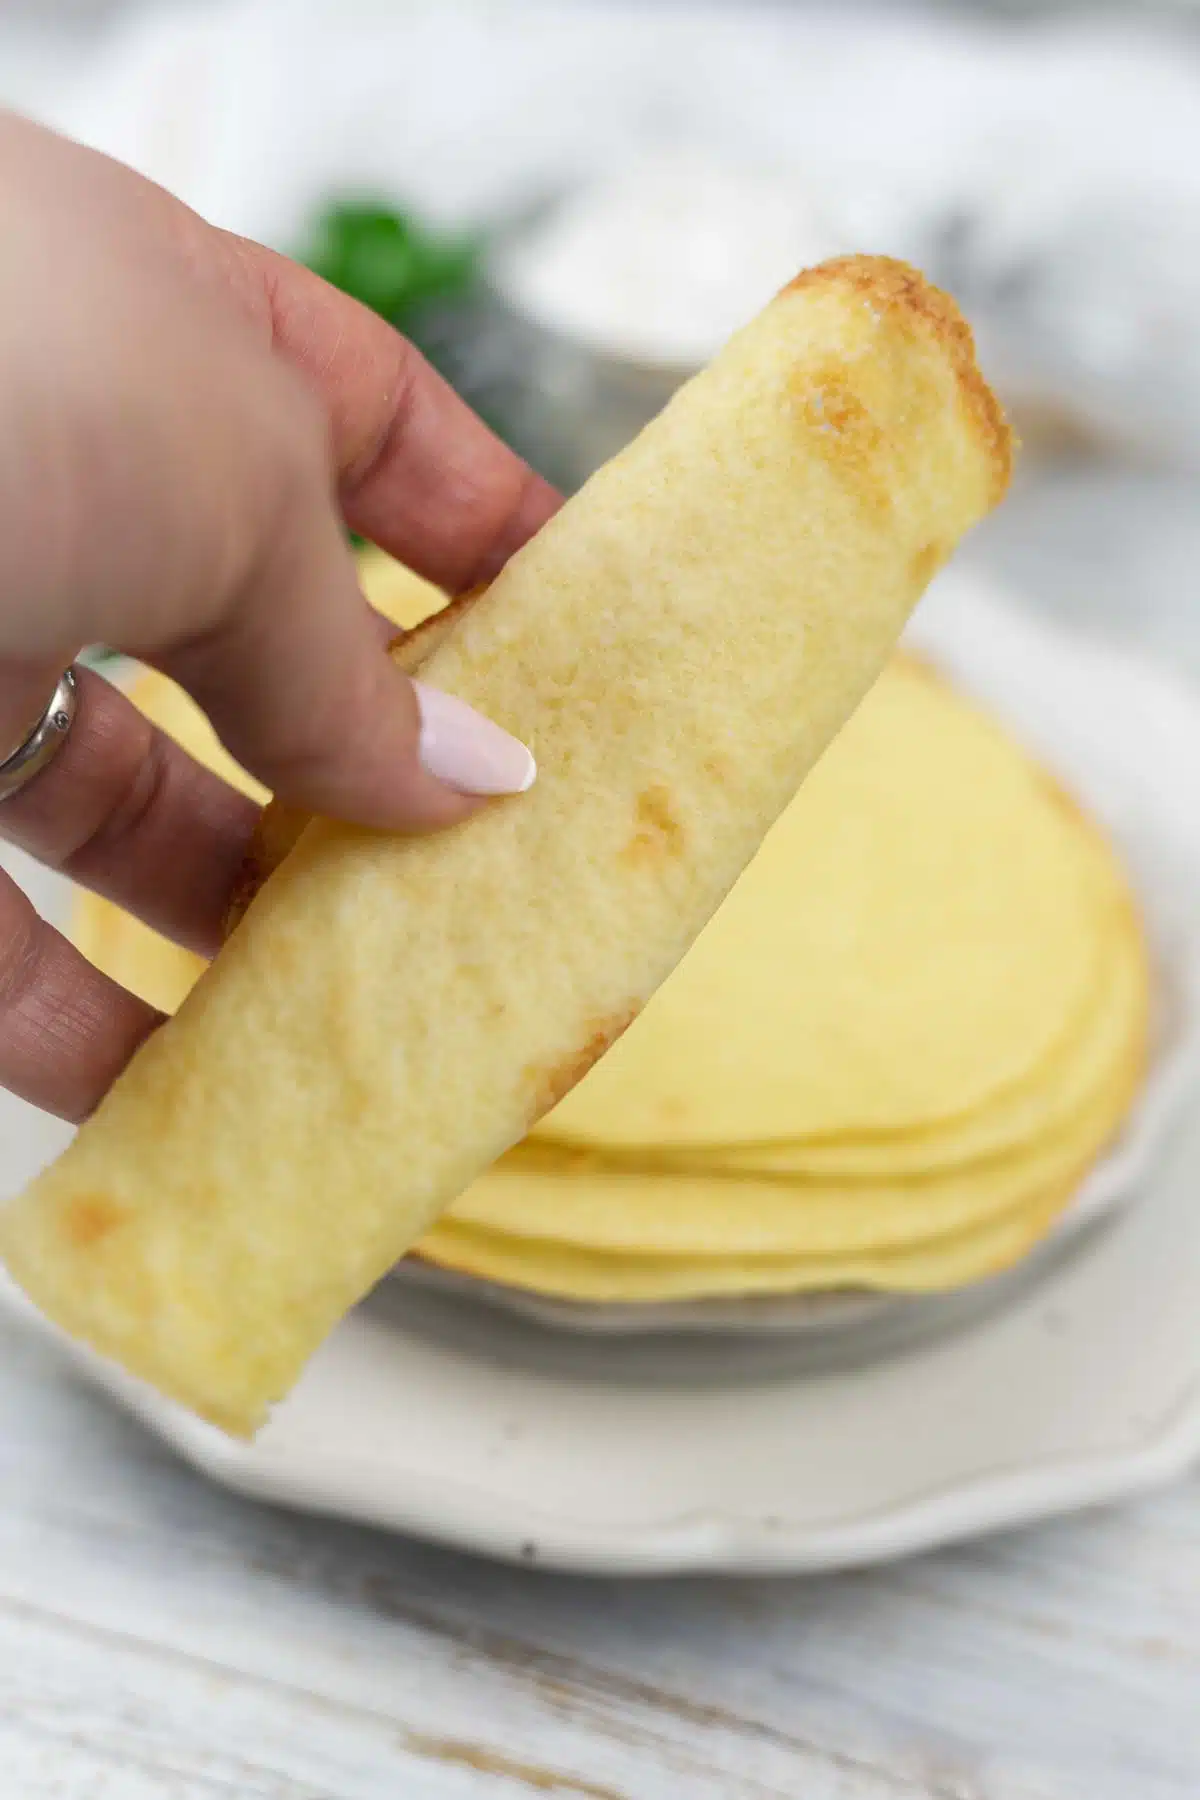 Oven baked tortillas rolled with hand.